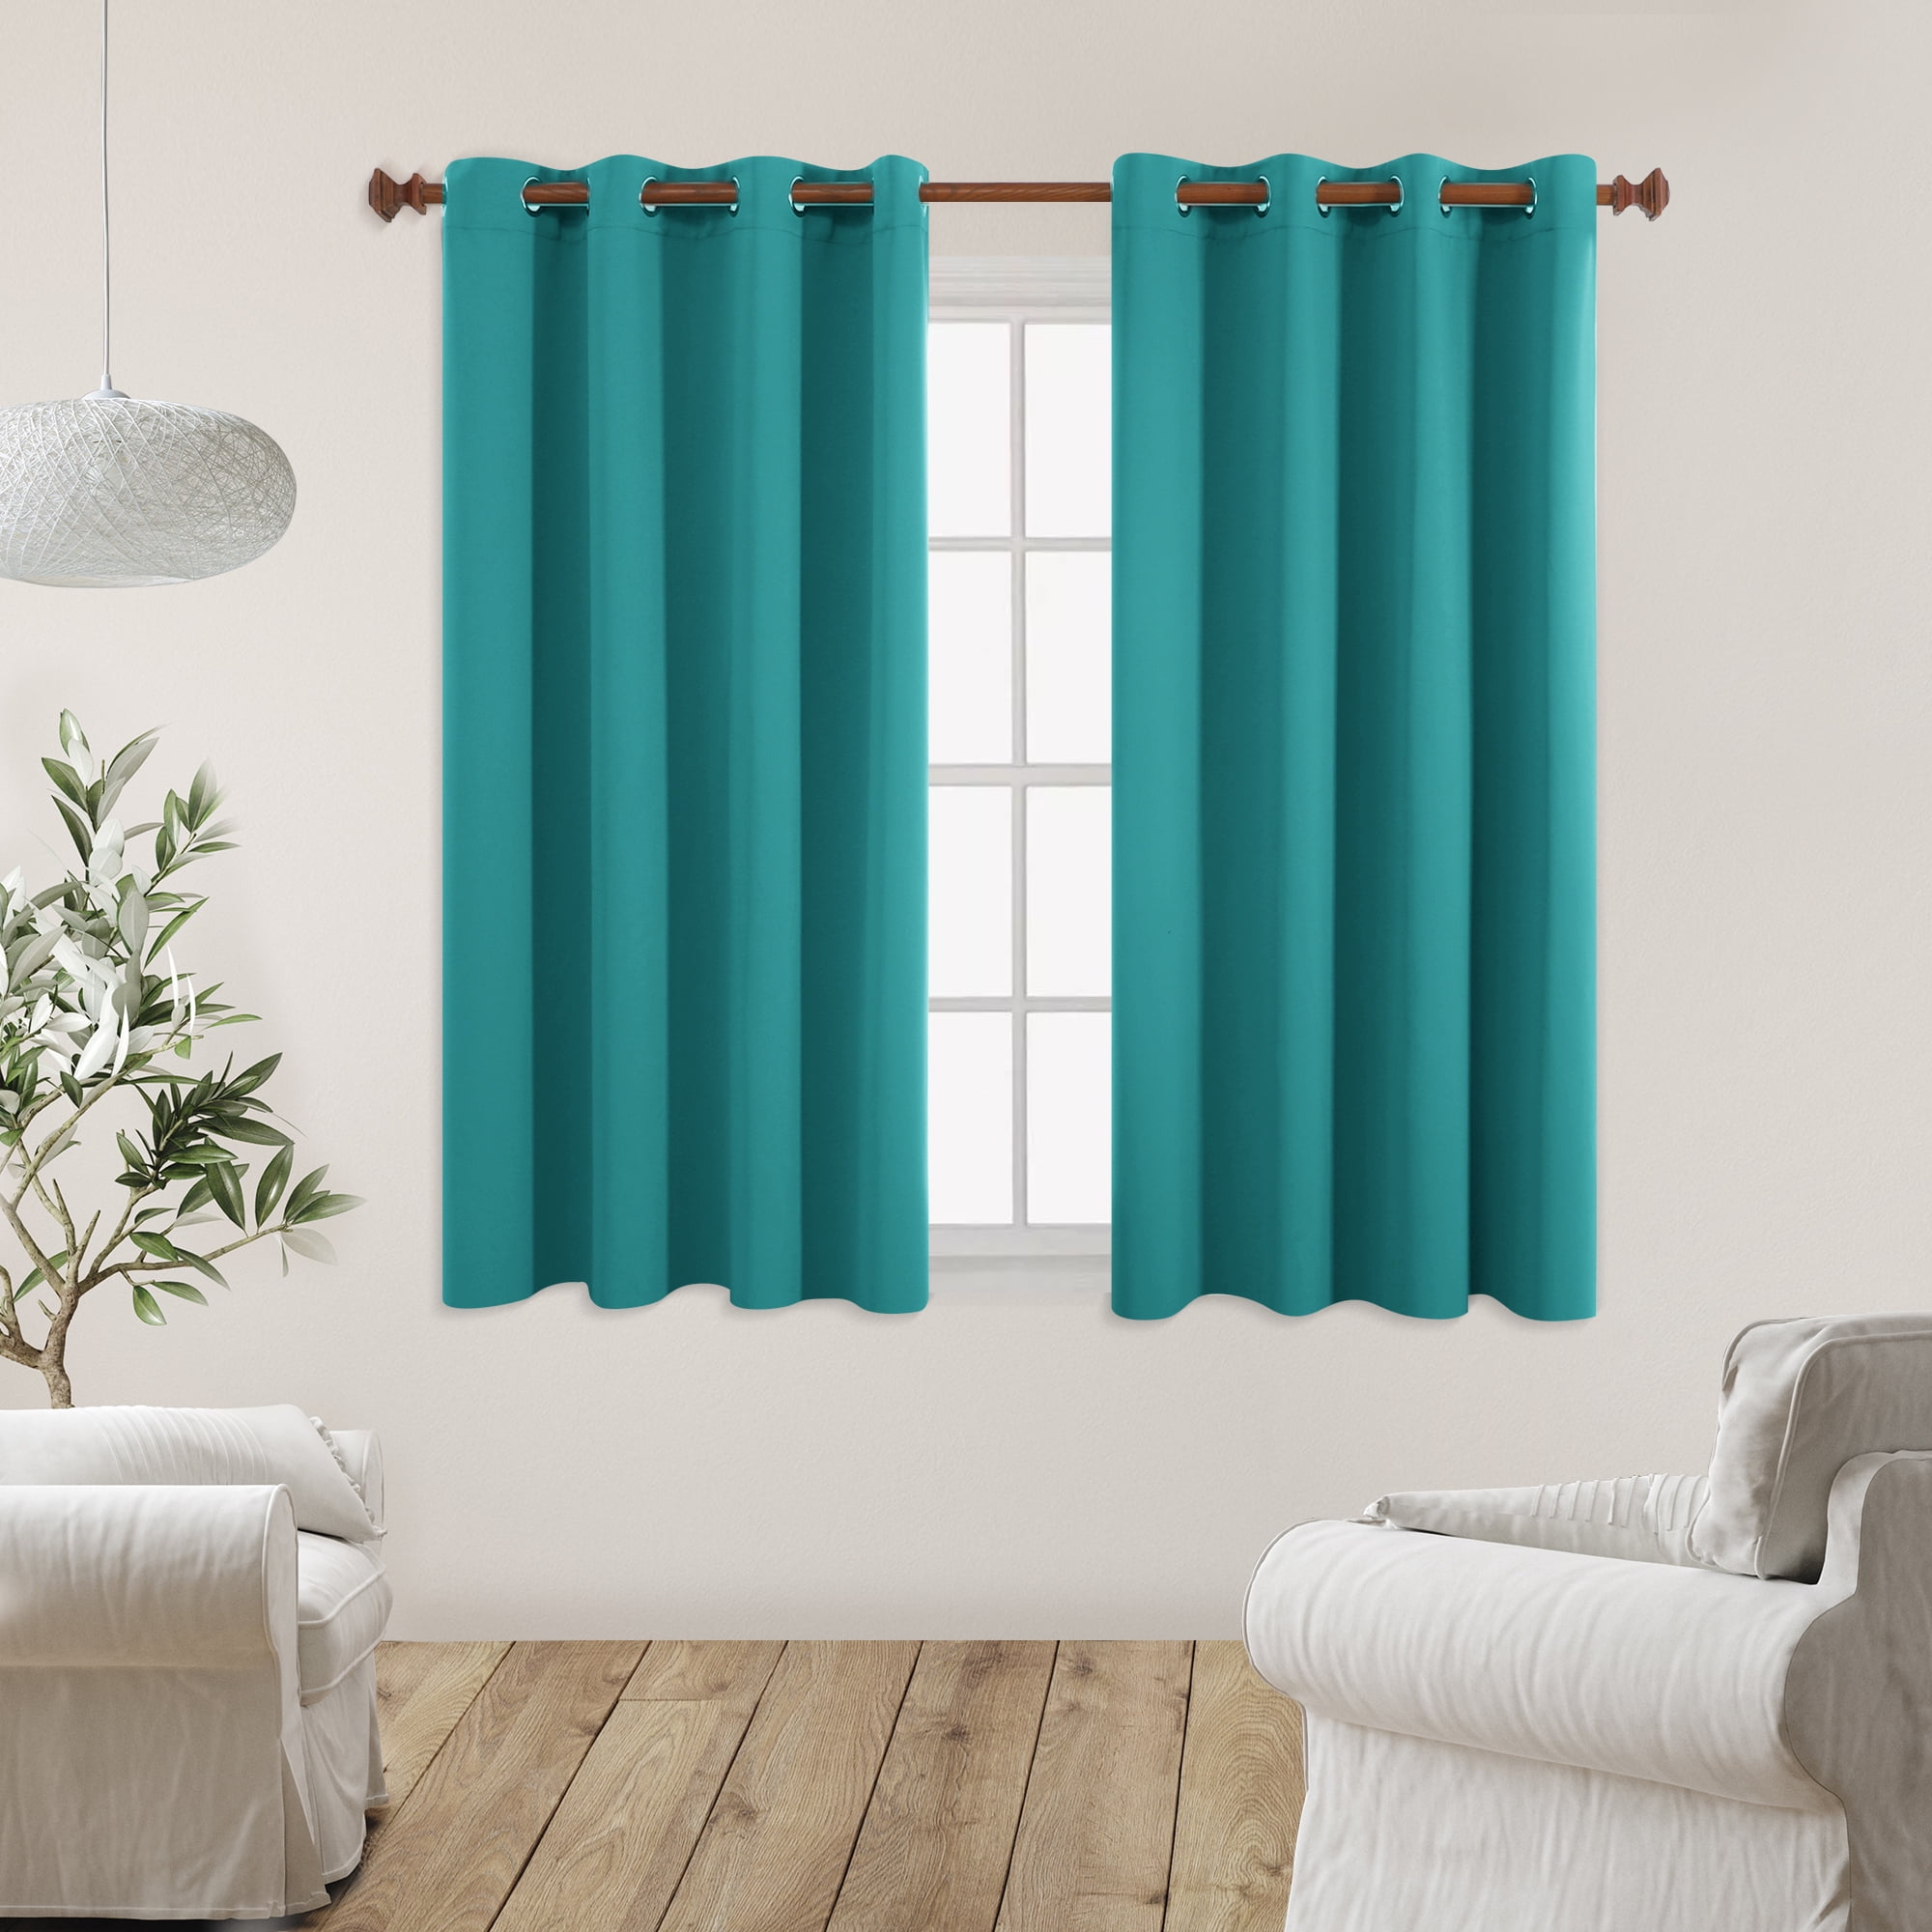  Yellowstone Decor Kitchen Window Curtains Turquoise Blackout  Curtains Printing Grommet Insulate W42 x L63 : Home & Kitchen